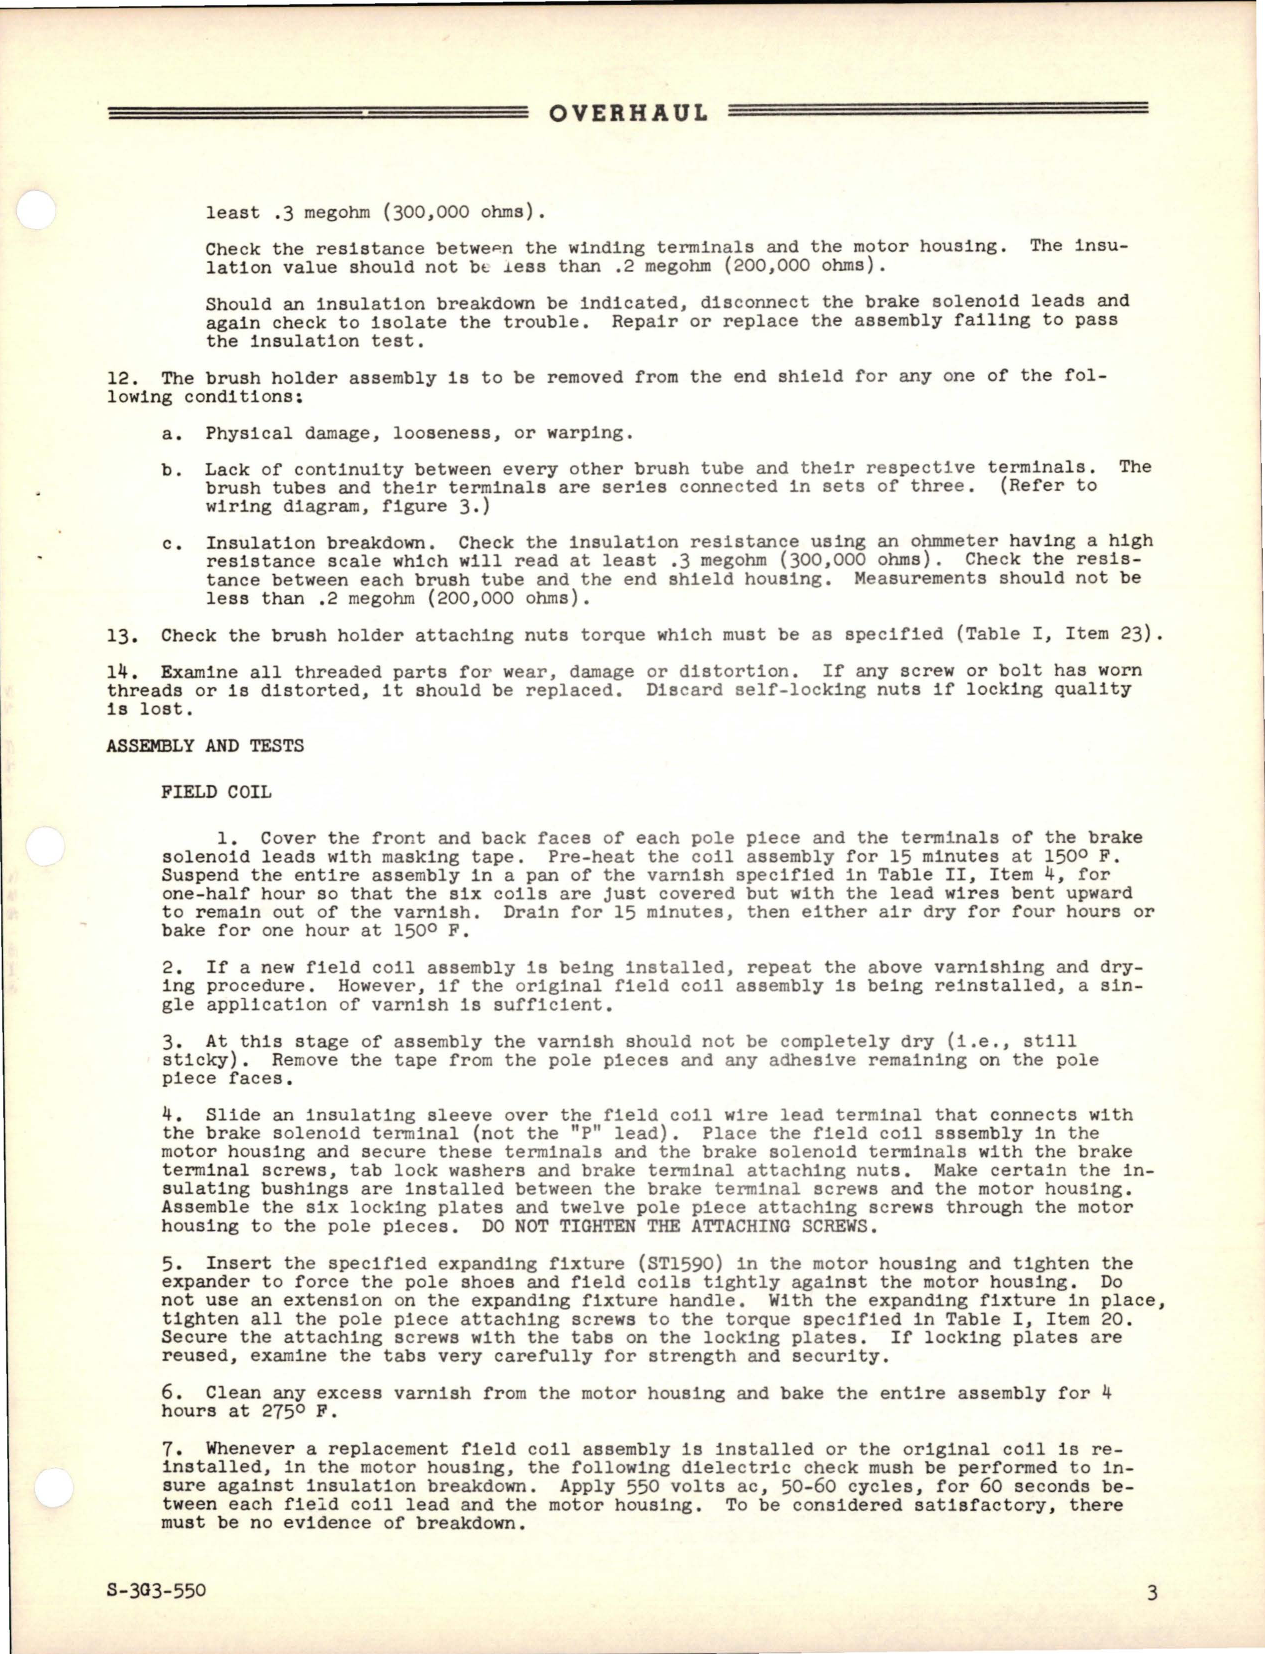 Sample page 7 from AirCorps Library document: Propeller Overhaul for Motor and Brake - Model C632S-B Series